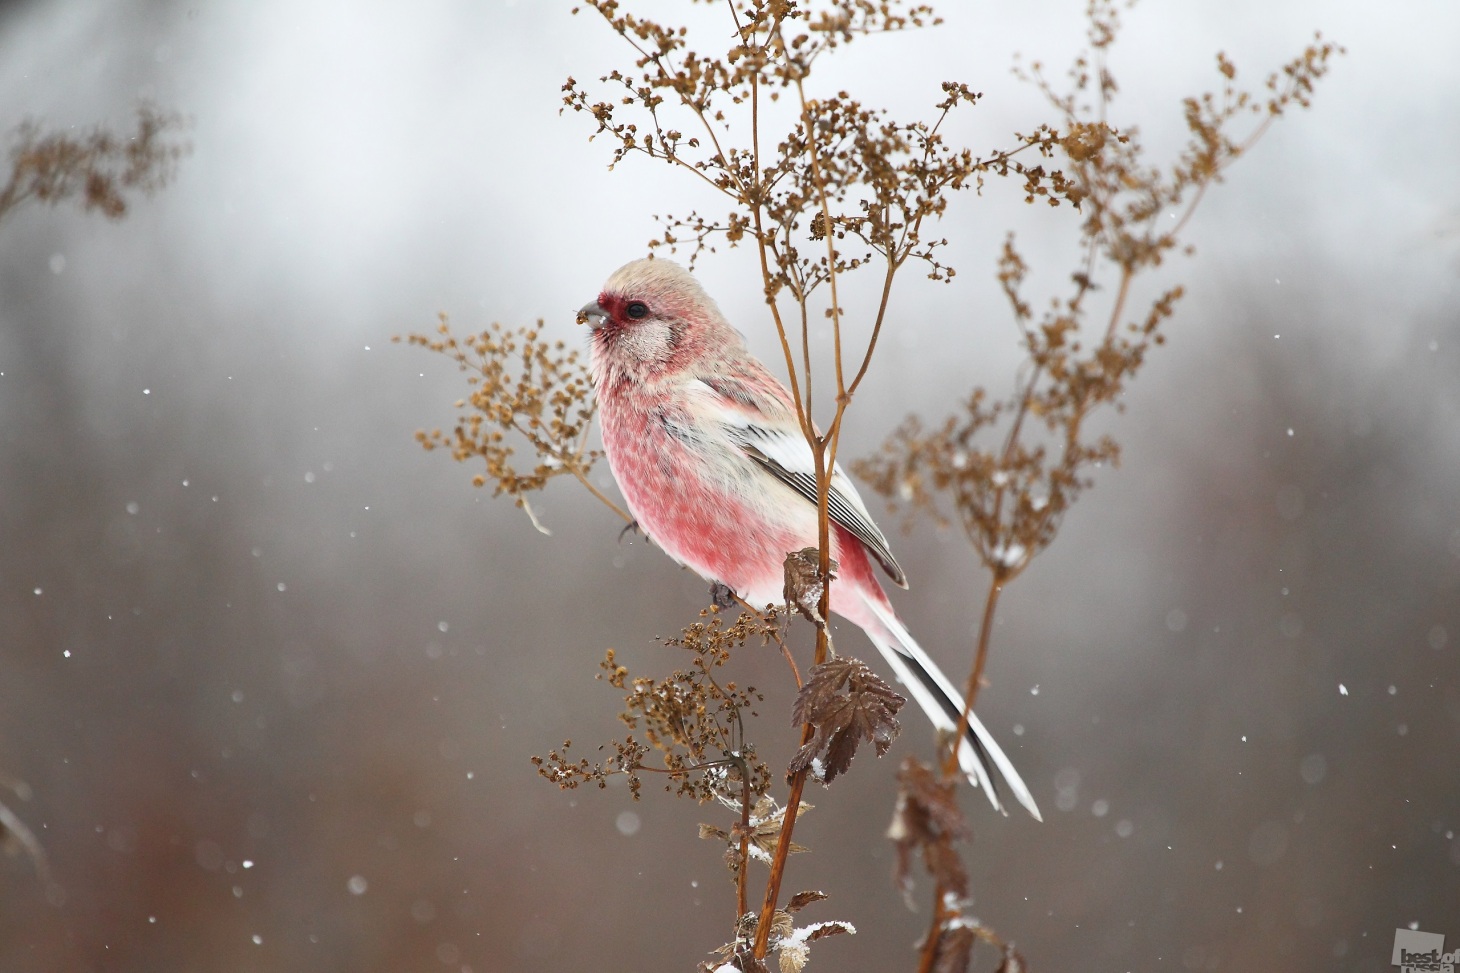  The long-tailed rosefinch, a non-migratory bird common to Siberia and the Urals.